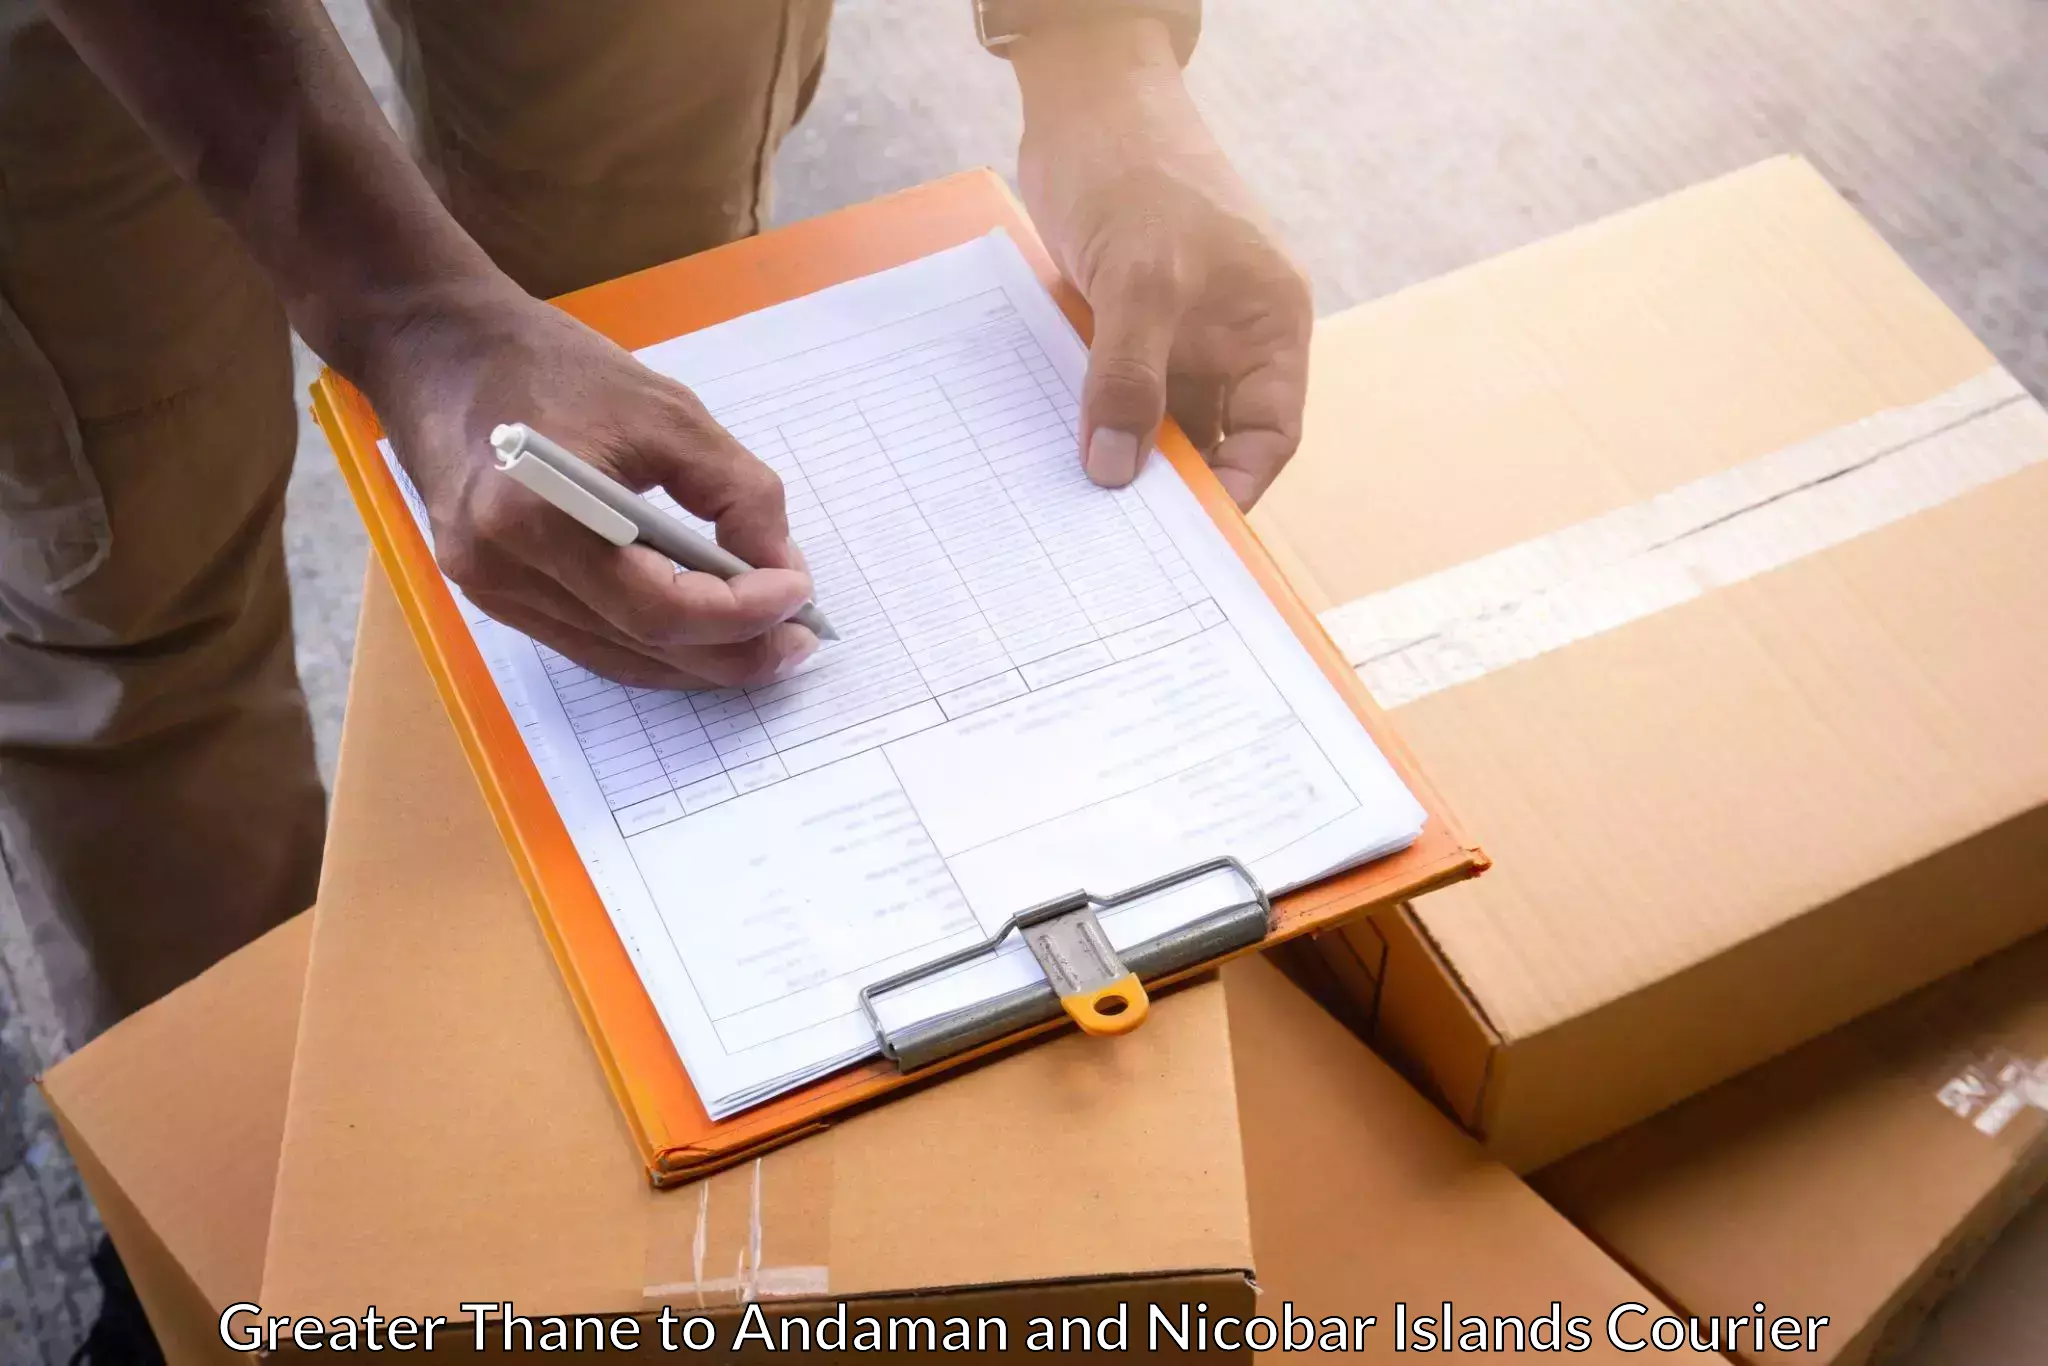 Digital courier platforms Greater Thane to Andaman and Nicobar Islands